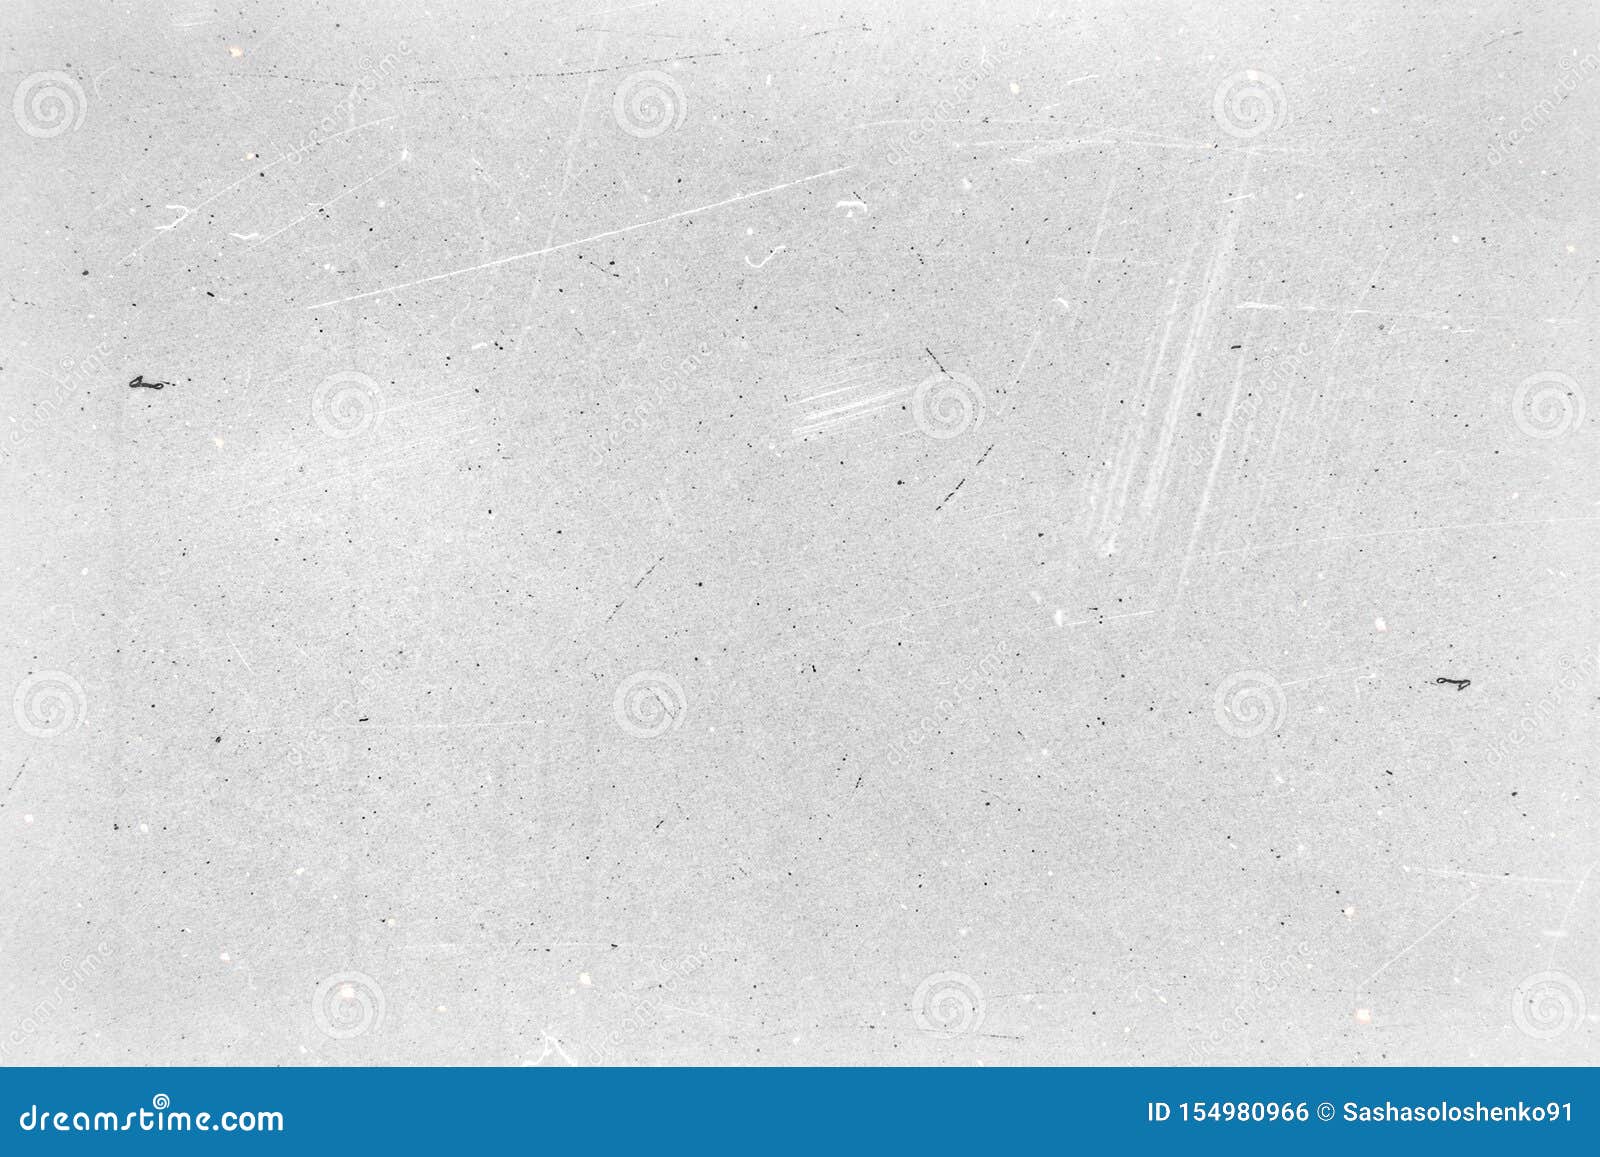 abstract white background with vintage grunge texture , old rough paper banner.